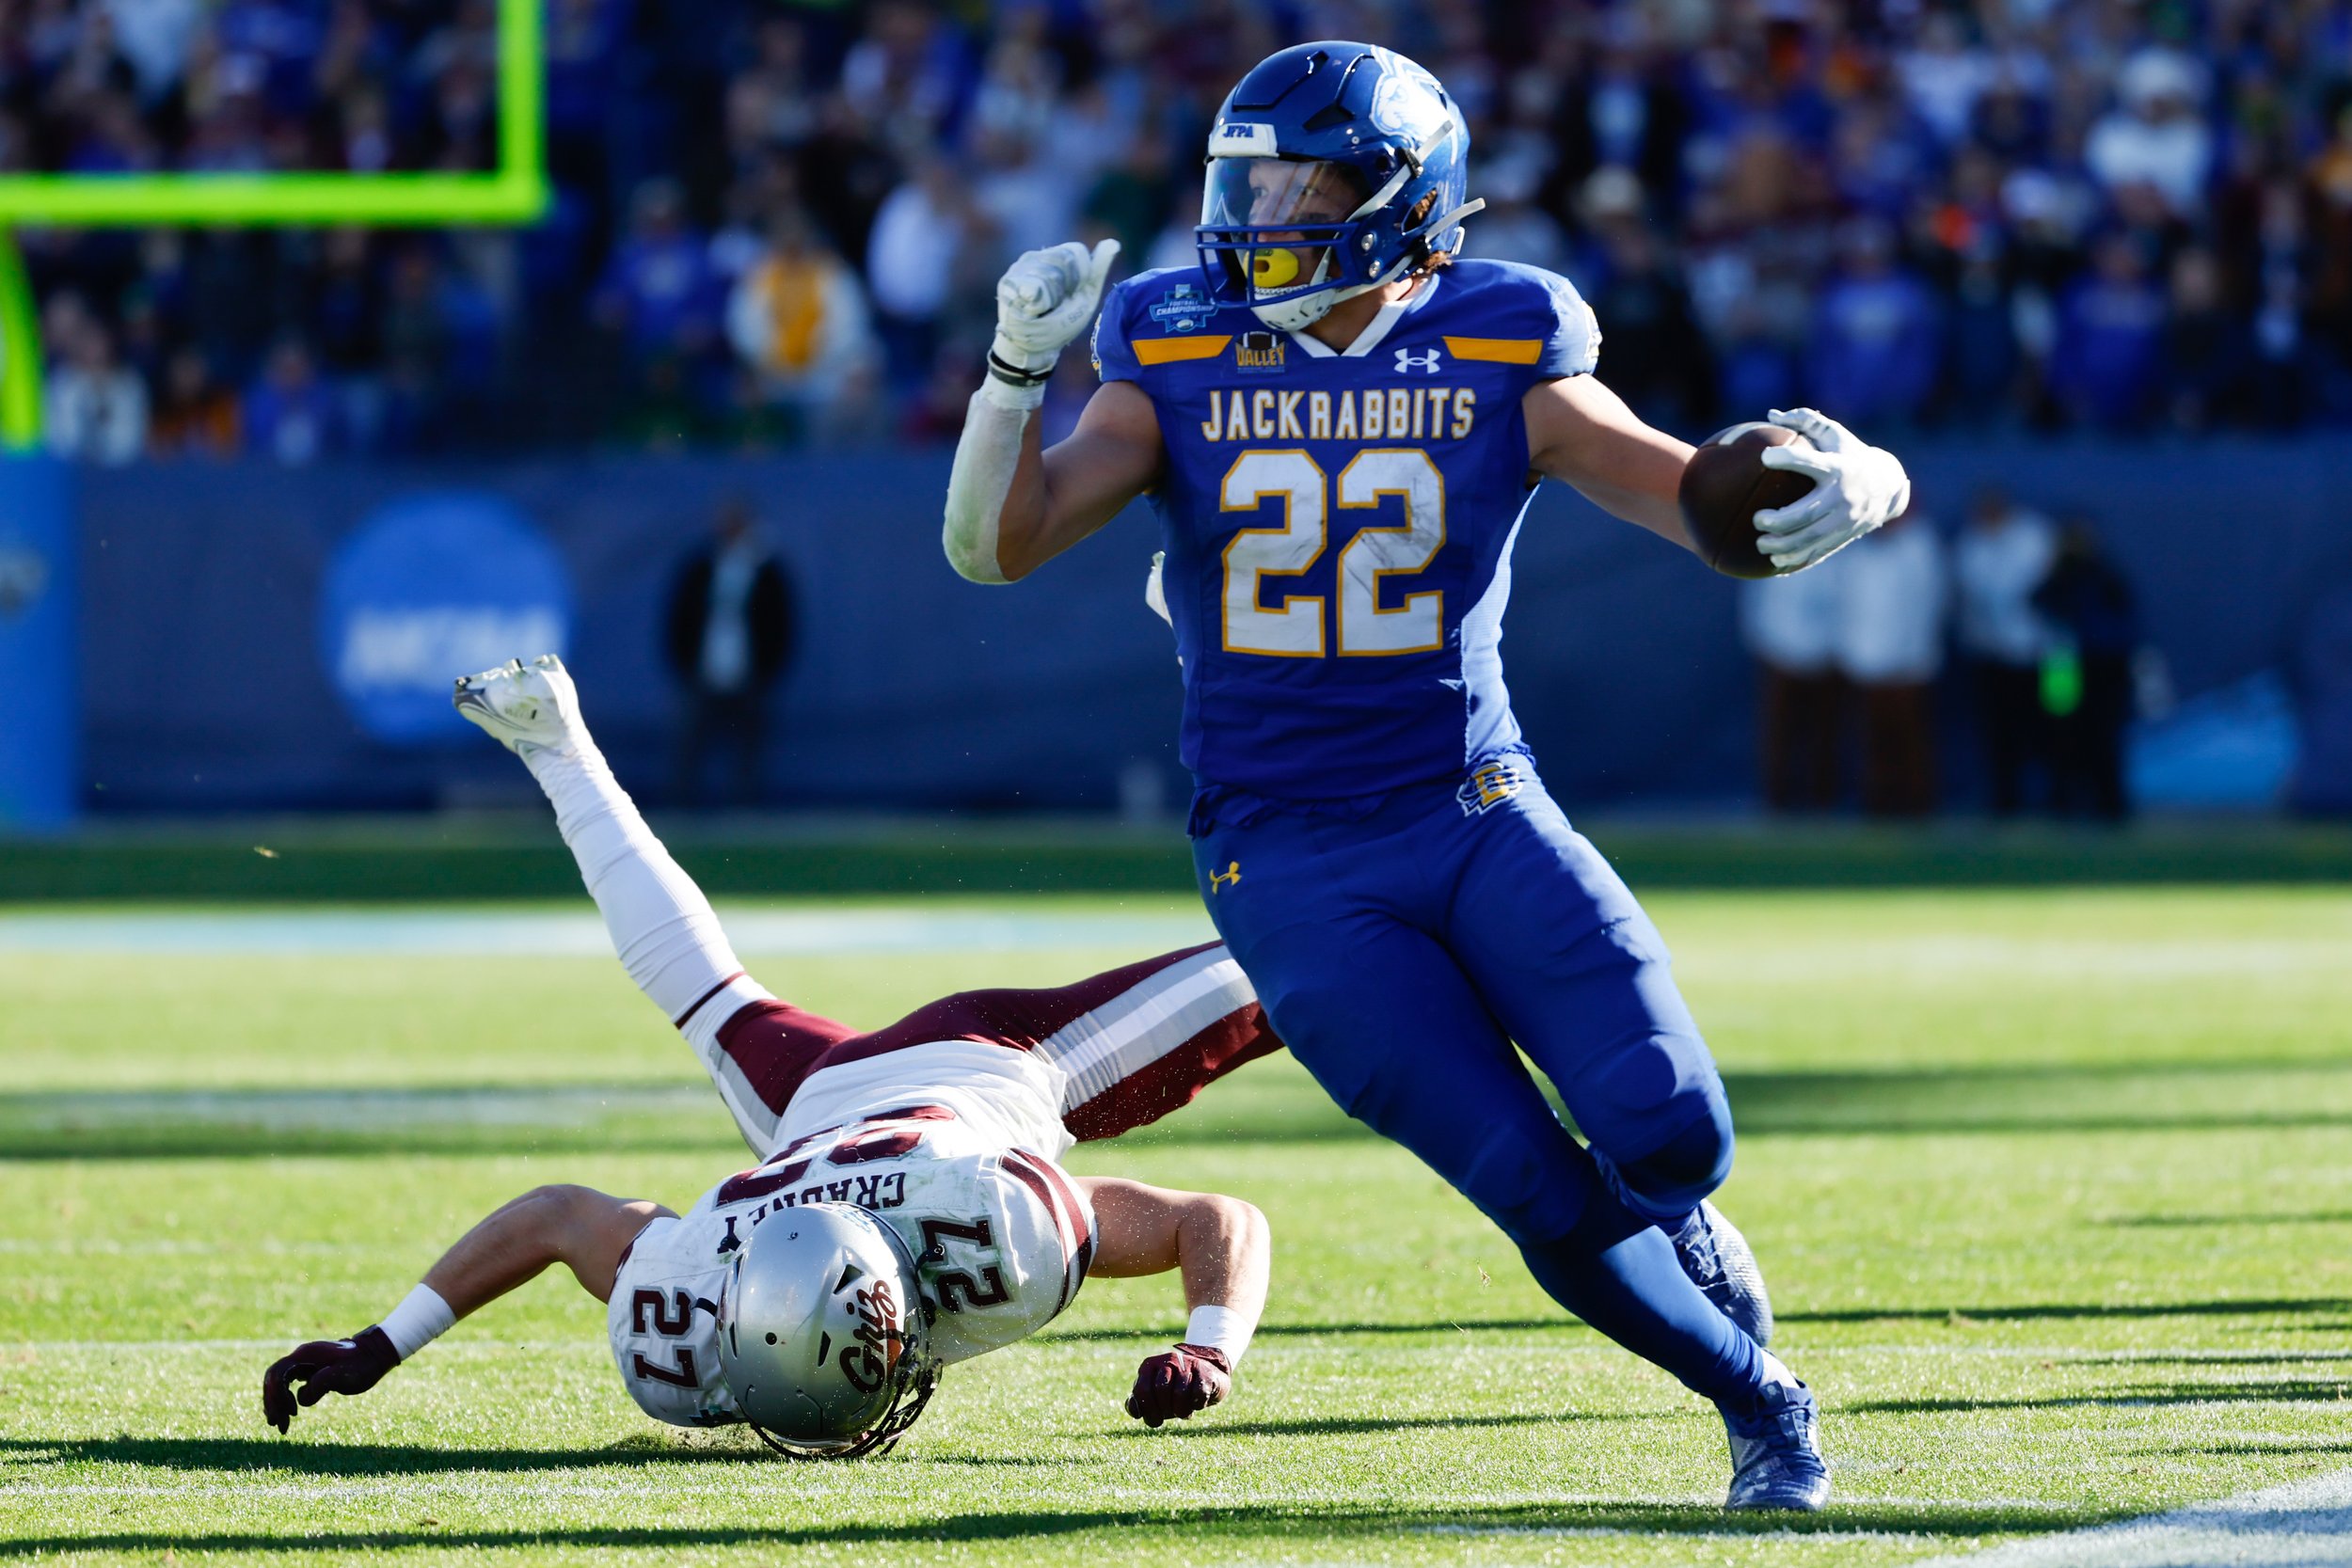  FRISCO, TEXAS - JANUARY 7: Isaiah Davis #22 of the South Dakota State Jackrabbits rushes against the Montana Grizzlies during the Division I FCS Football Championship held at Toyota Stadium on January 7, 2024 in Frisco, Texas. (Photo by C. Morgan En